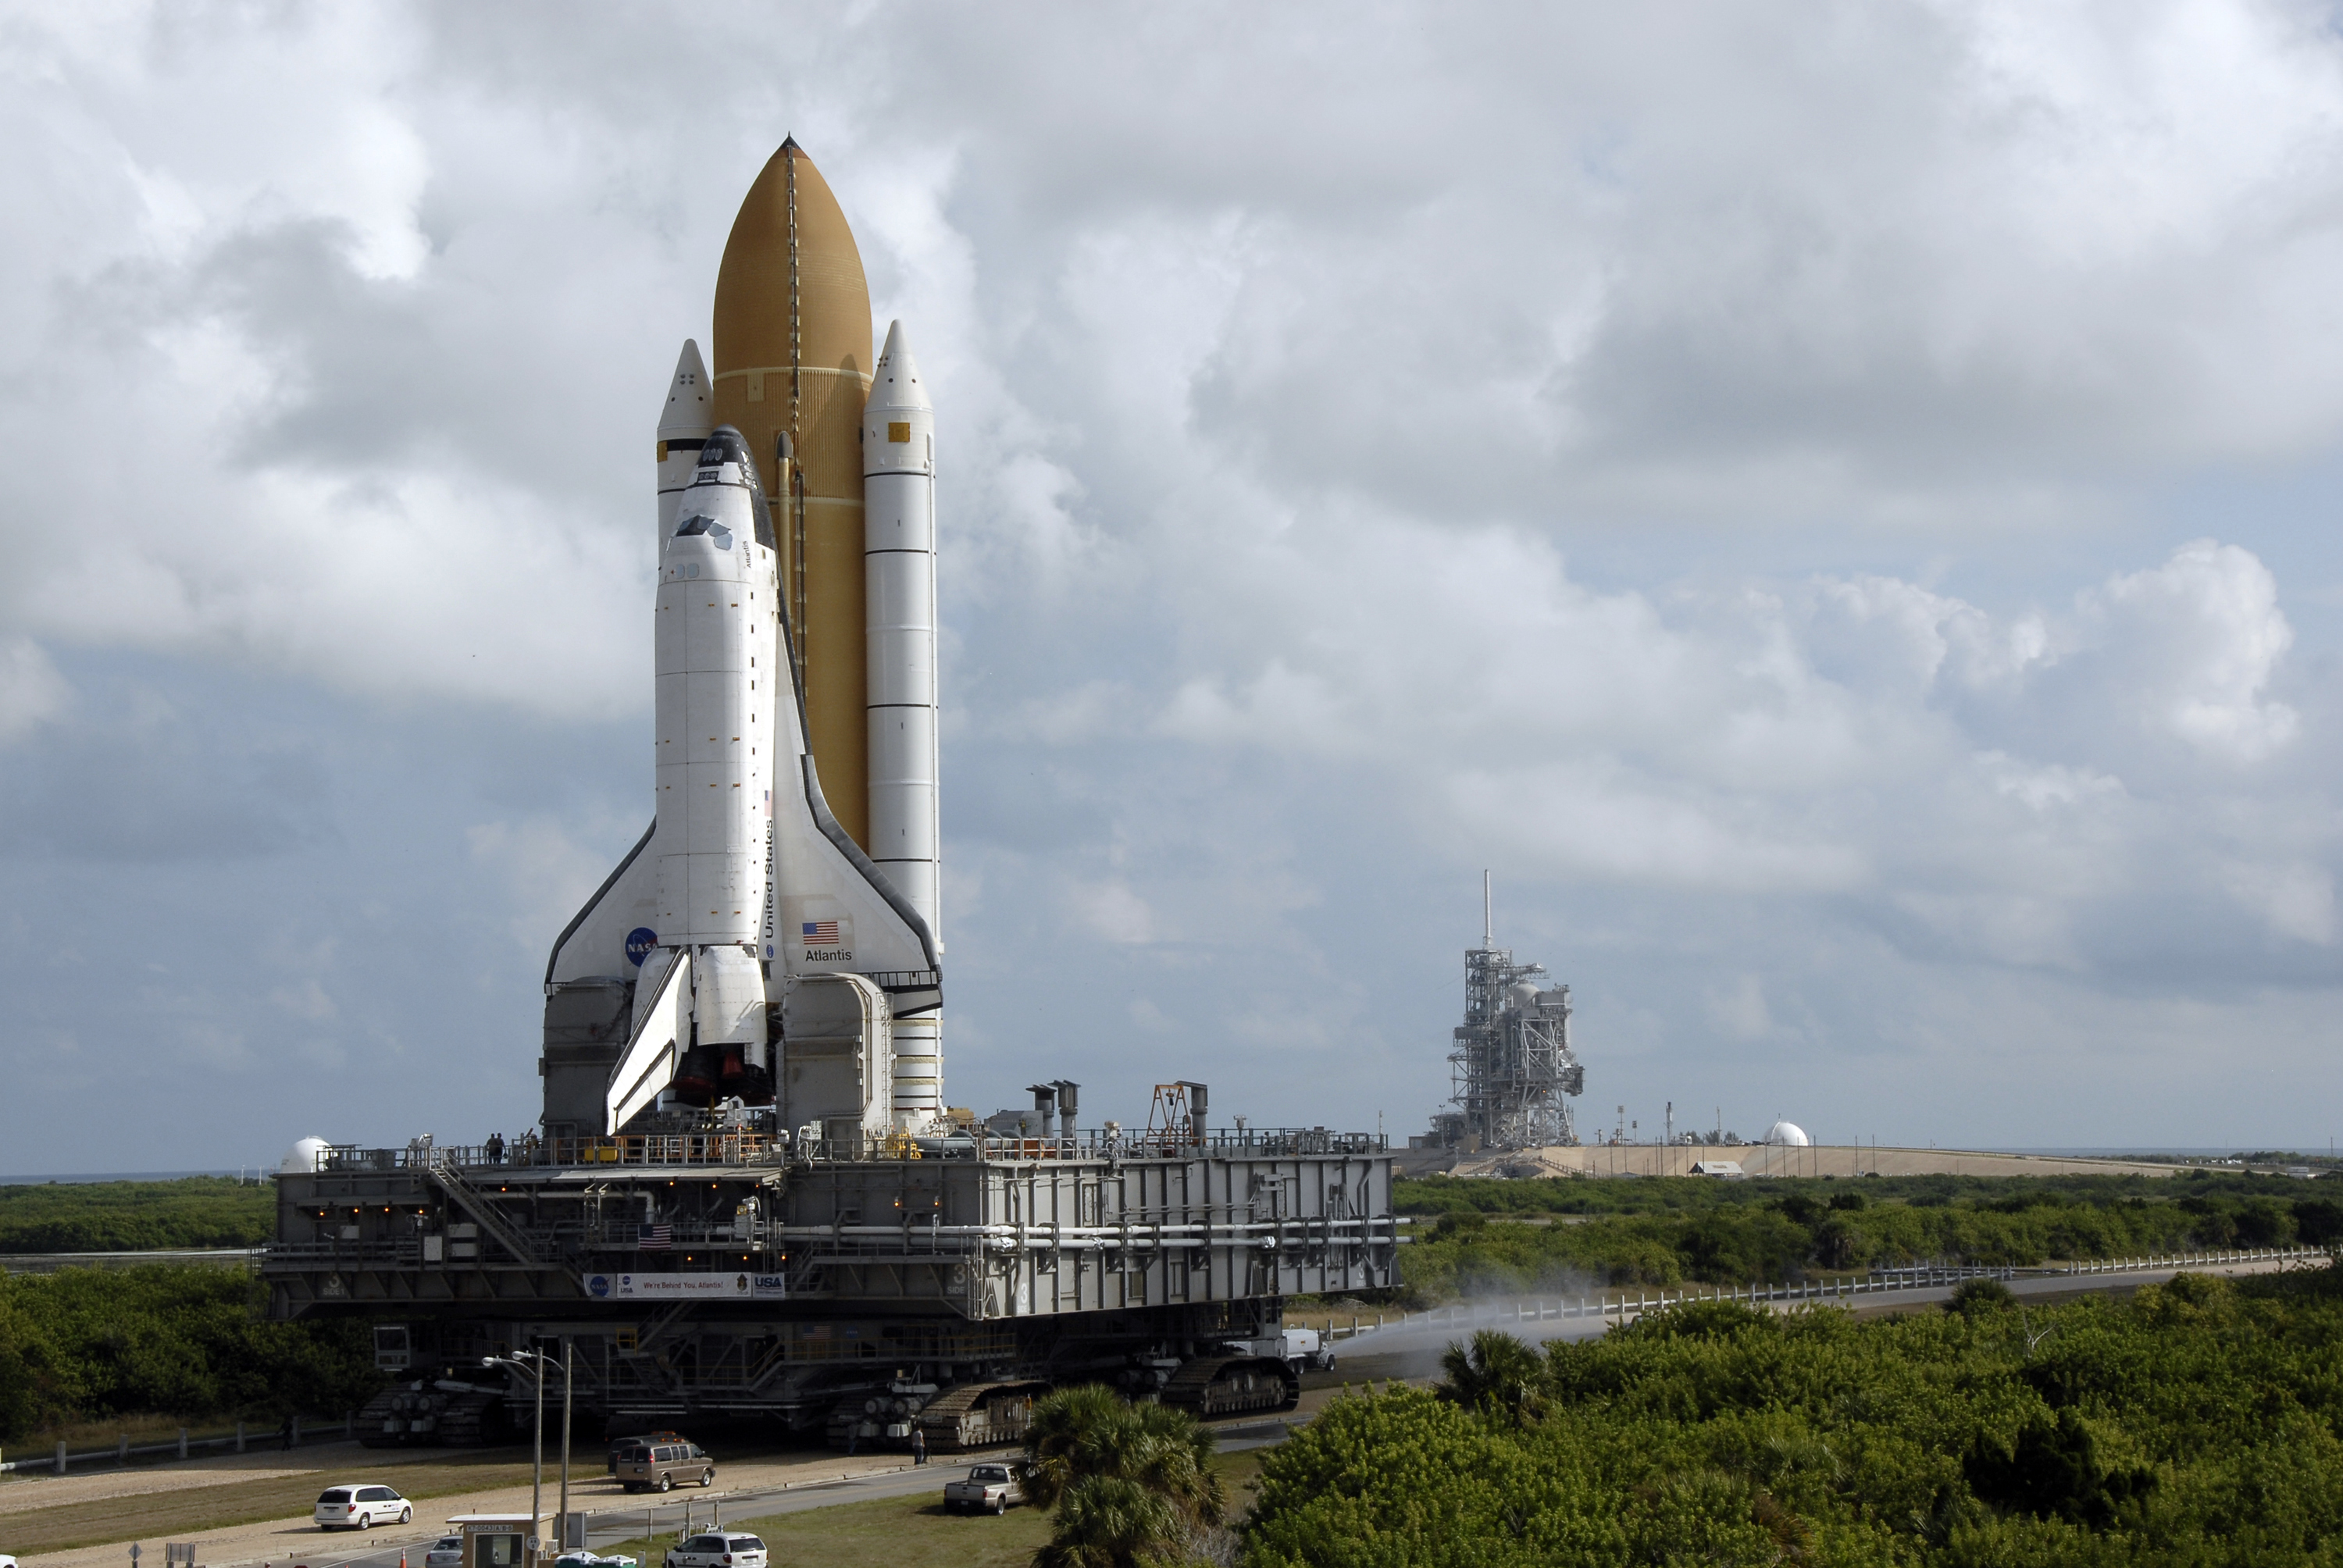 The audacious rescue plan that might have saved space shuttle ...